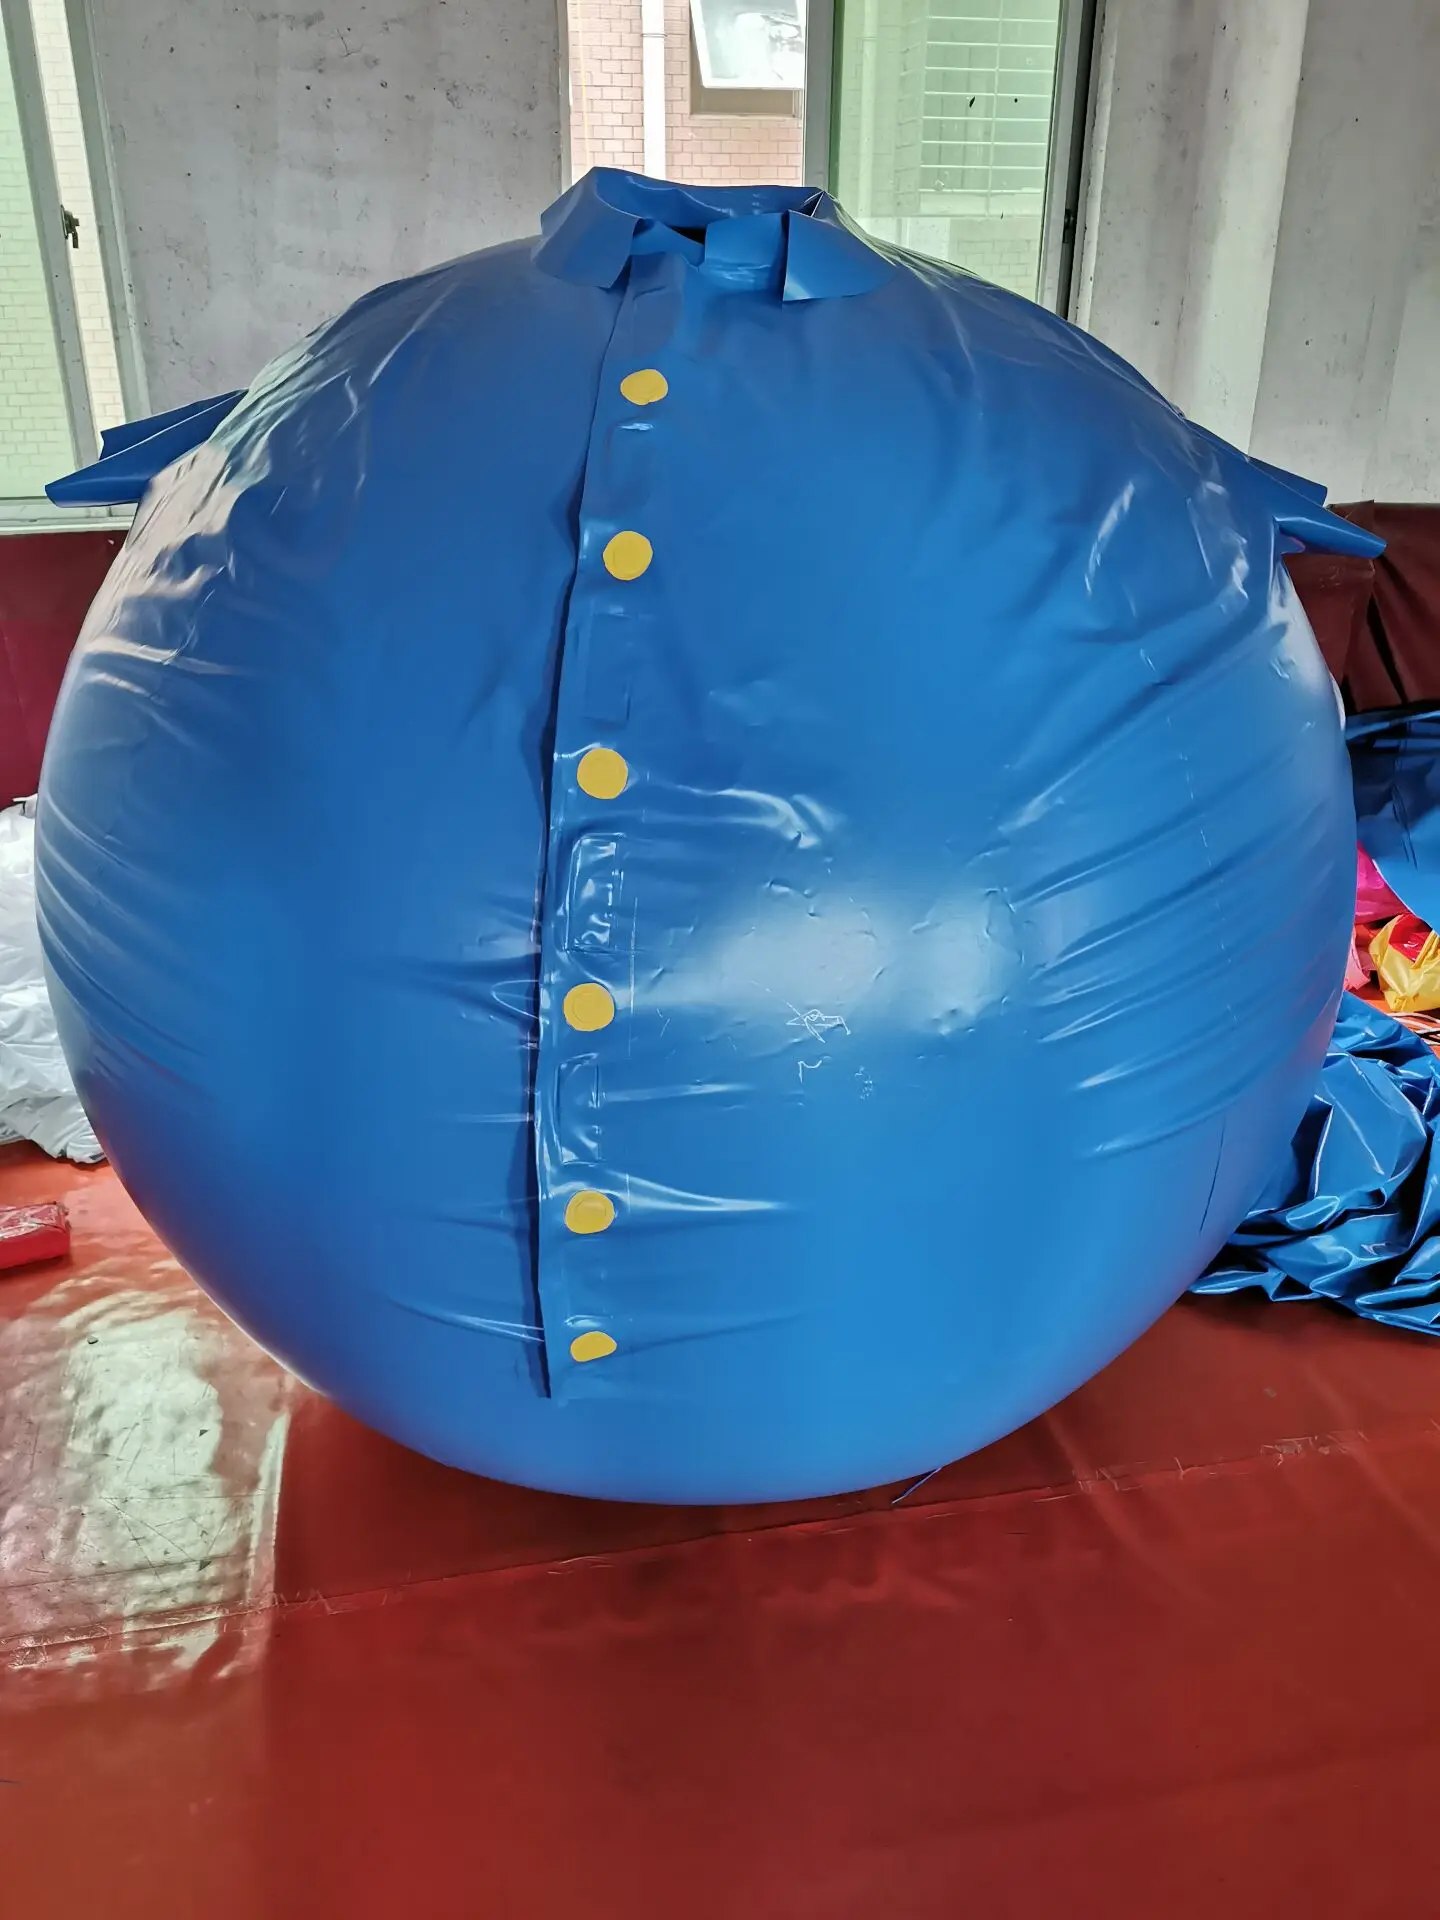 Taylormadeclips Blueberry Porn - Wholesale PVC Inflatable Moon Adult Costume From m.alibaba.com